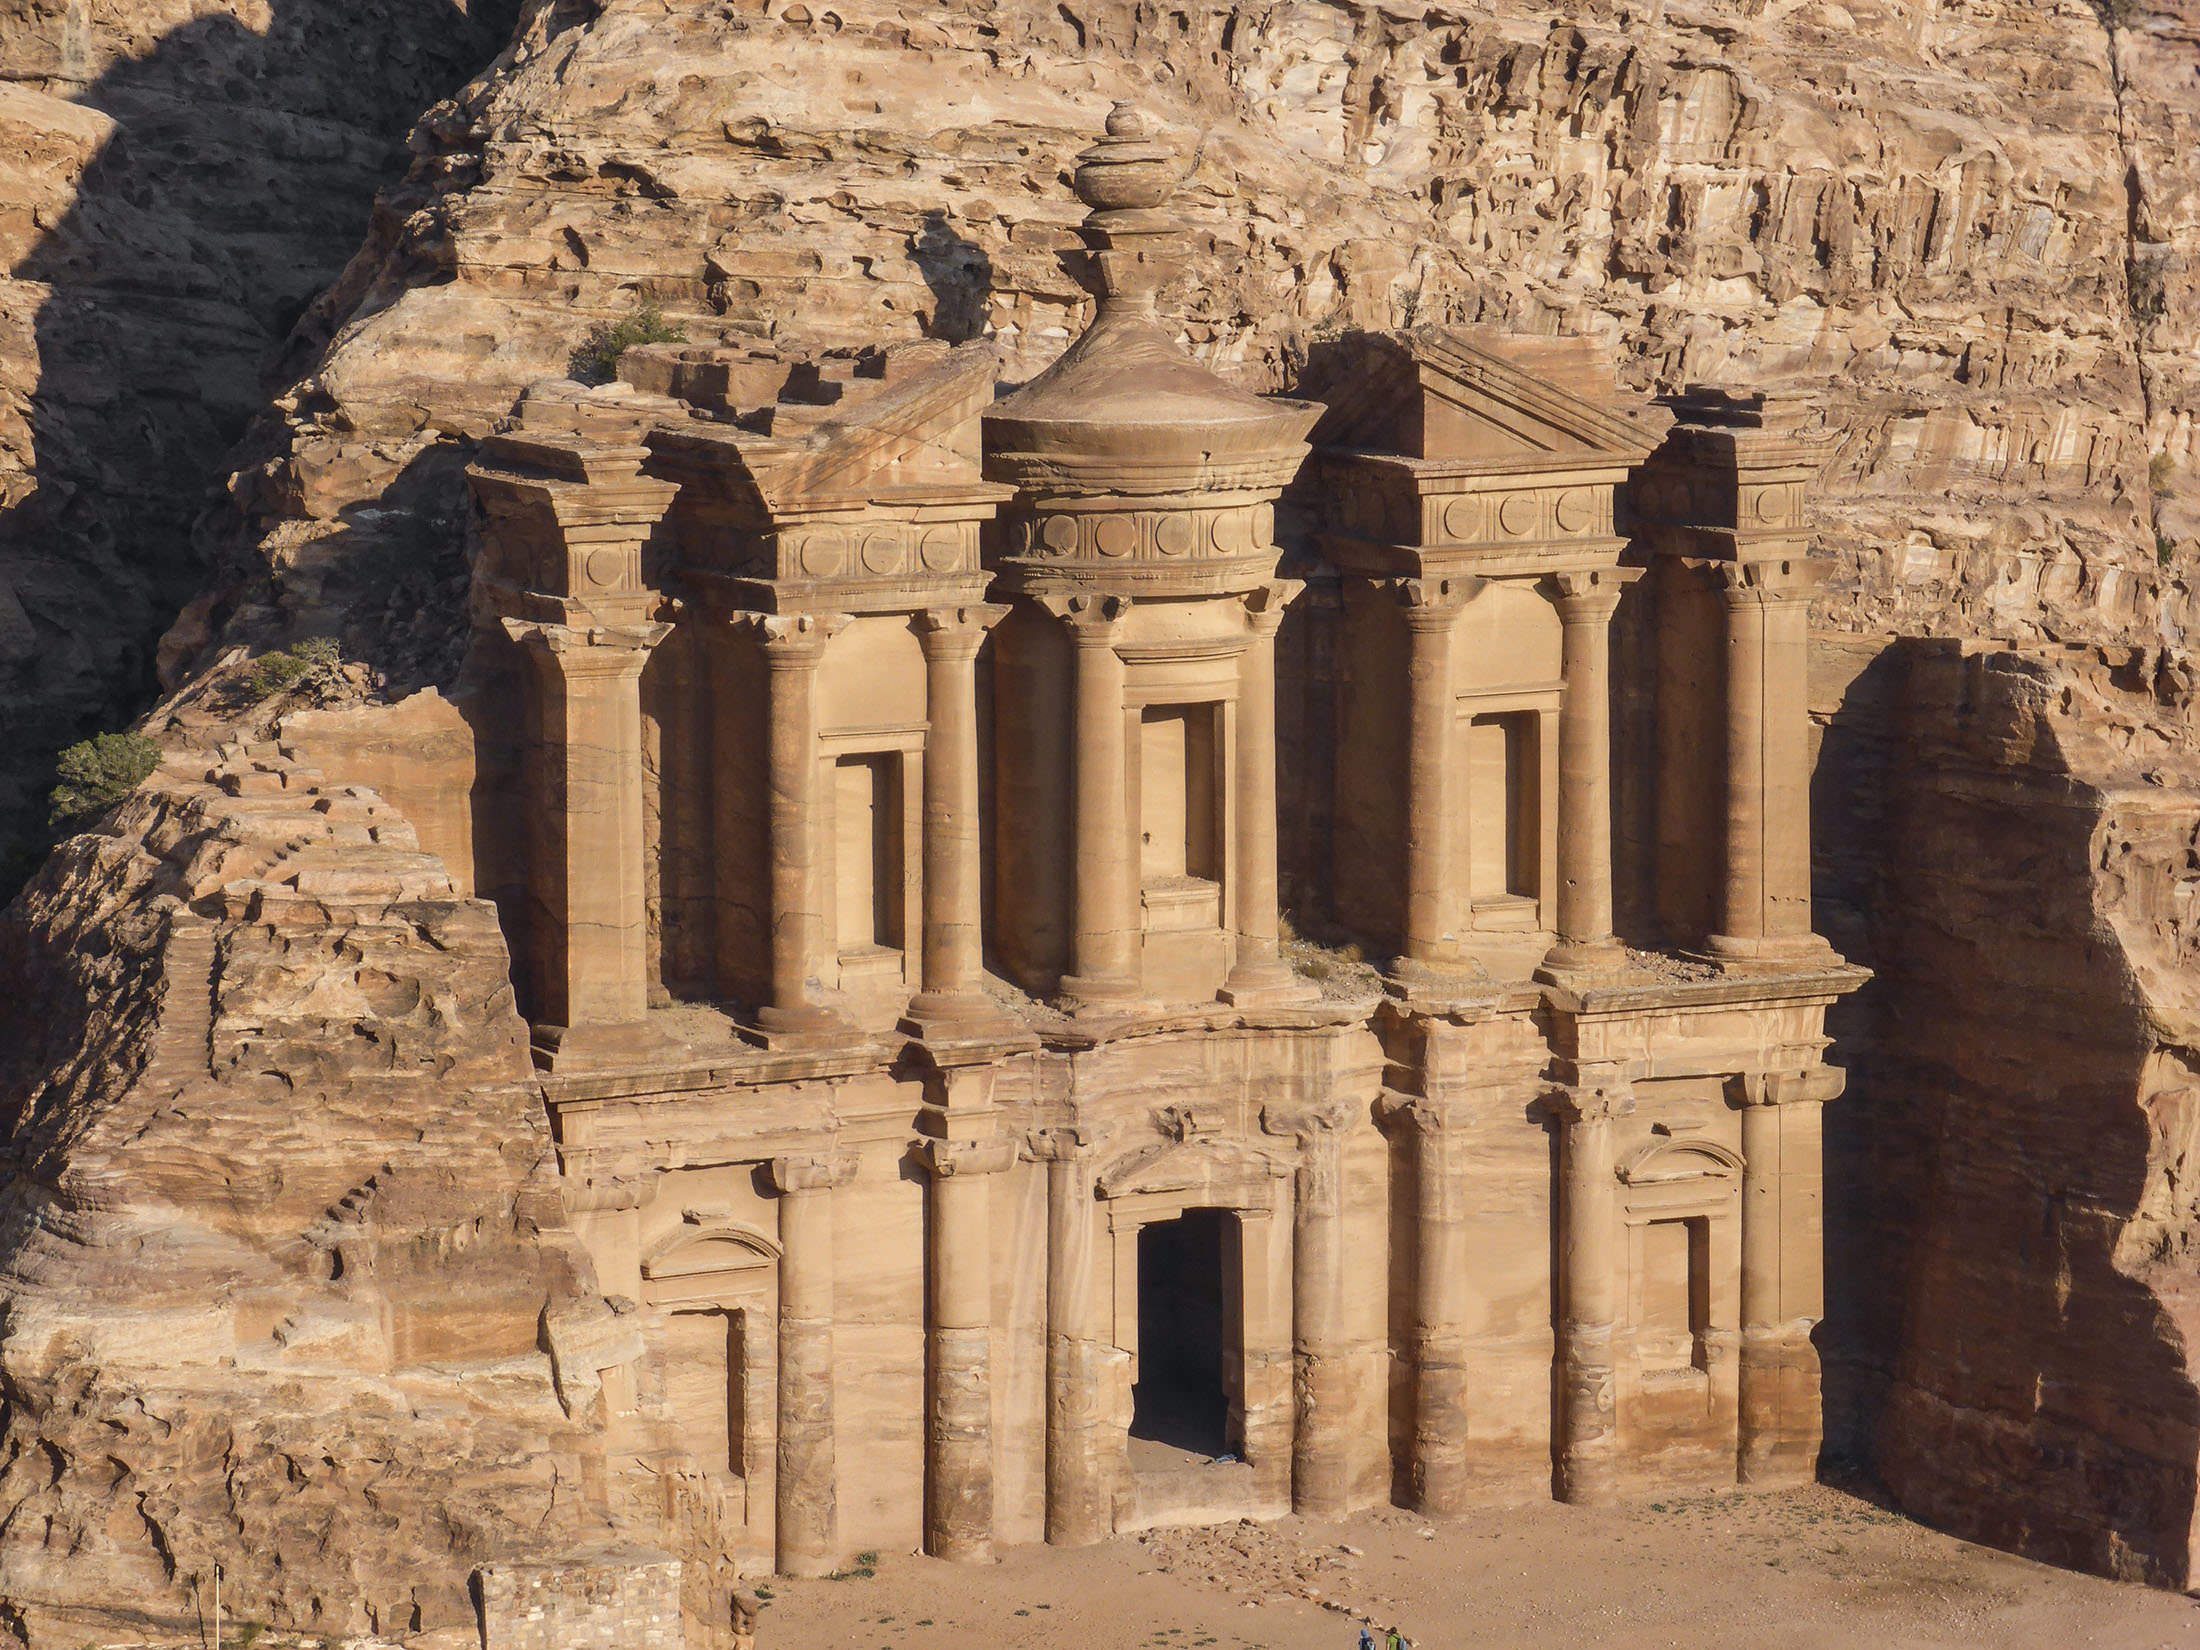 The Monastery (Ad Deir) from above in Petra Jordan